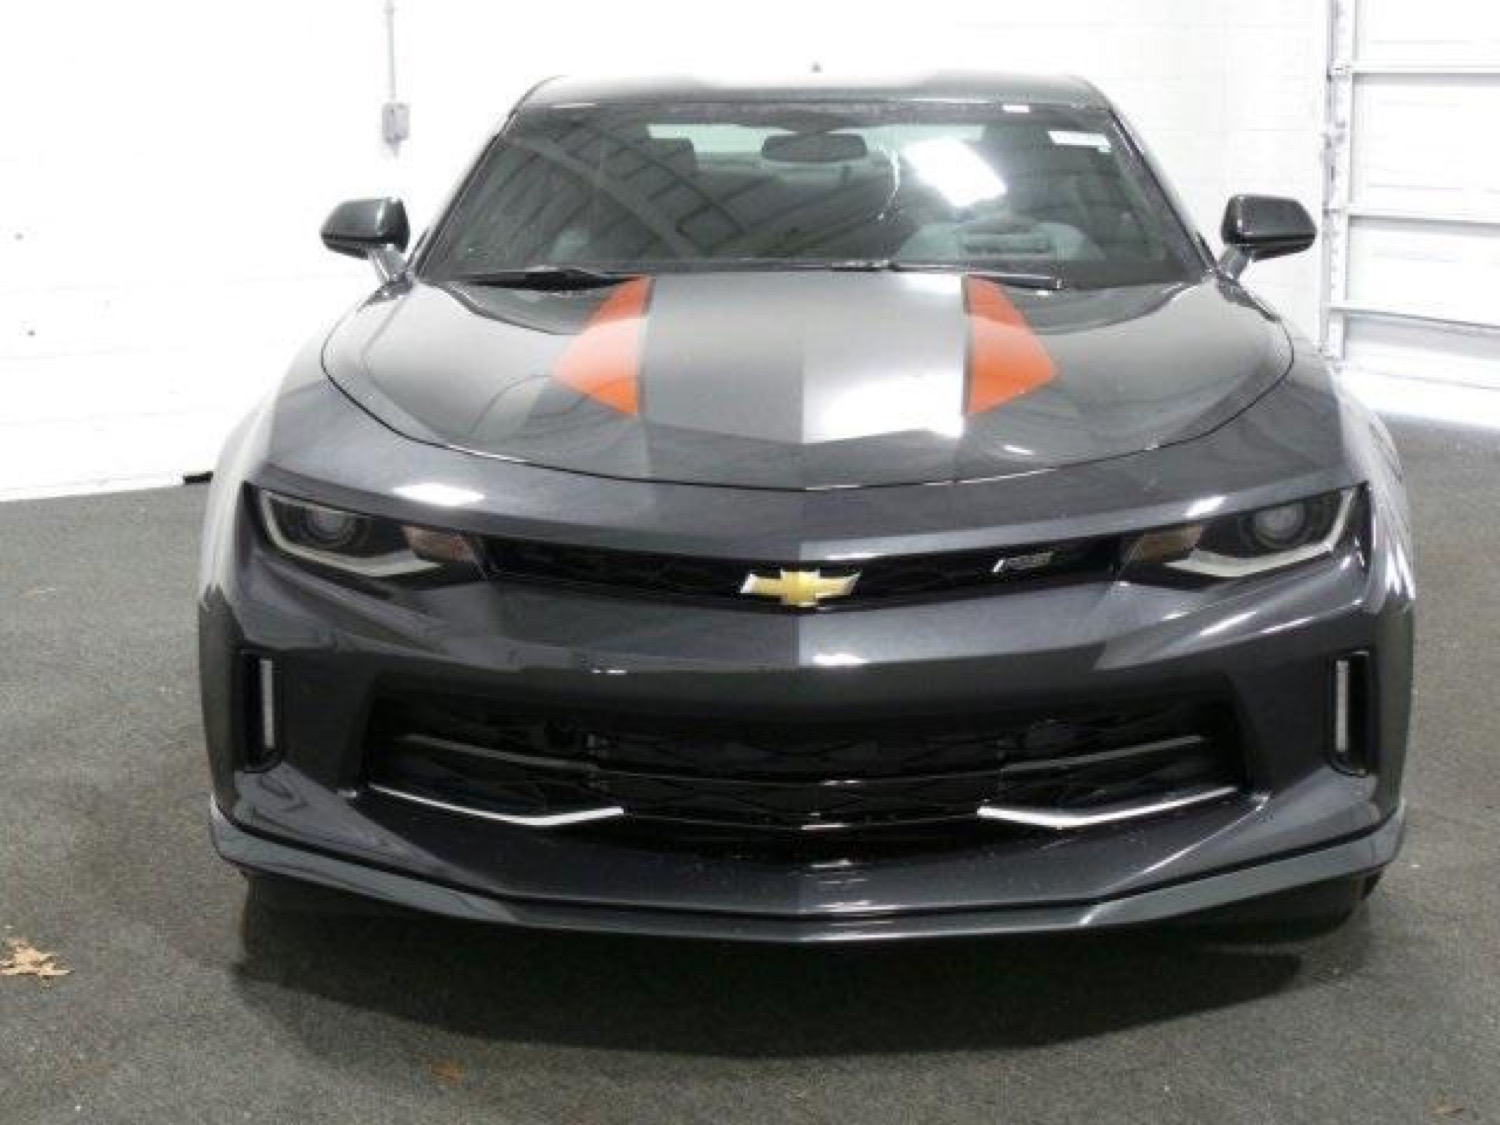 New 2017 Chevrolet Camaro 50th Anniversary Edition For Sale Gm Authority,Dehydrated Strawberries Air Fryer